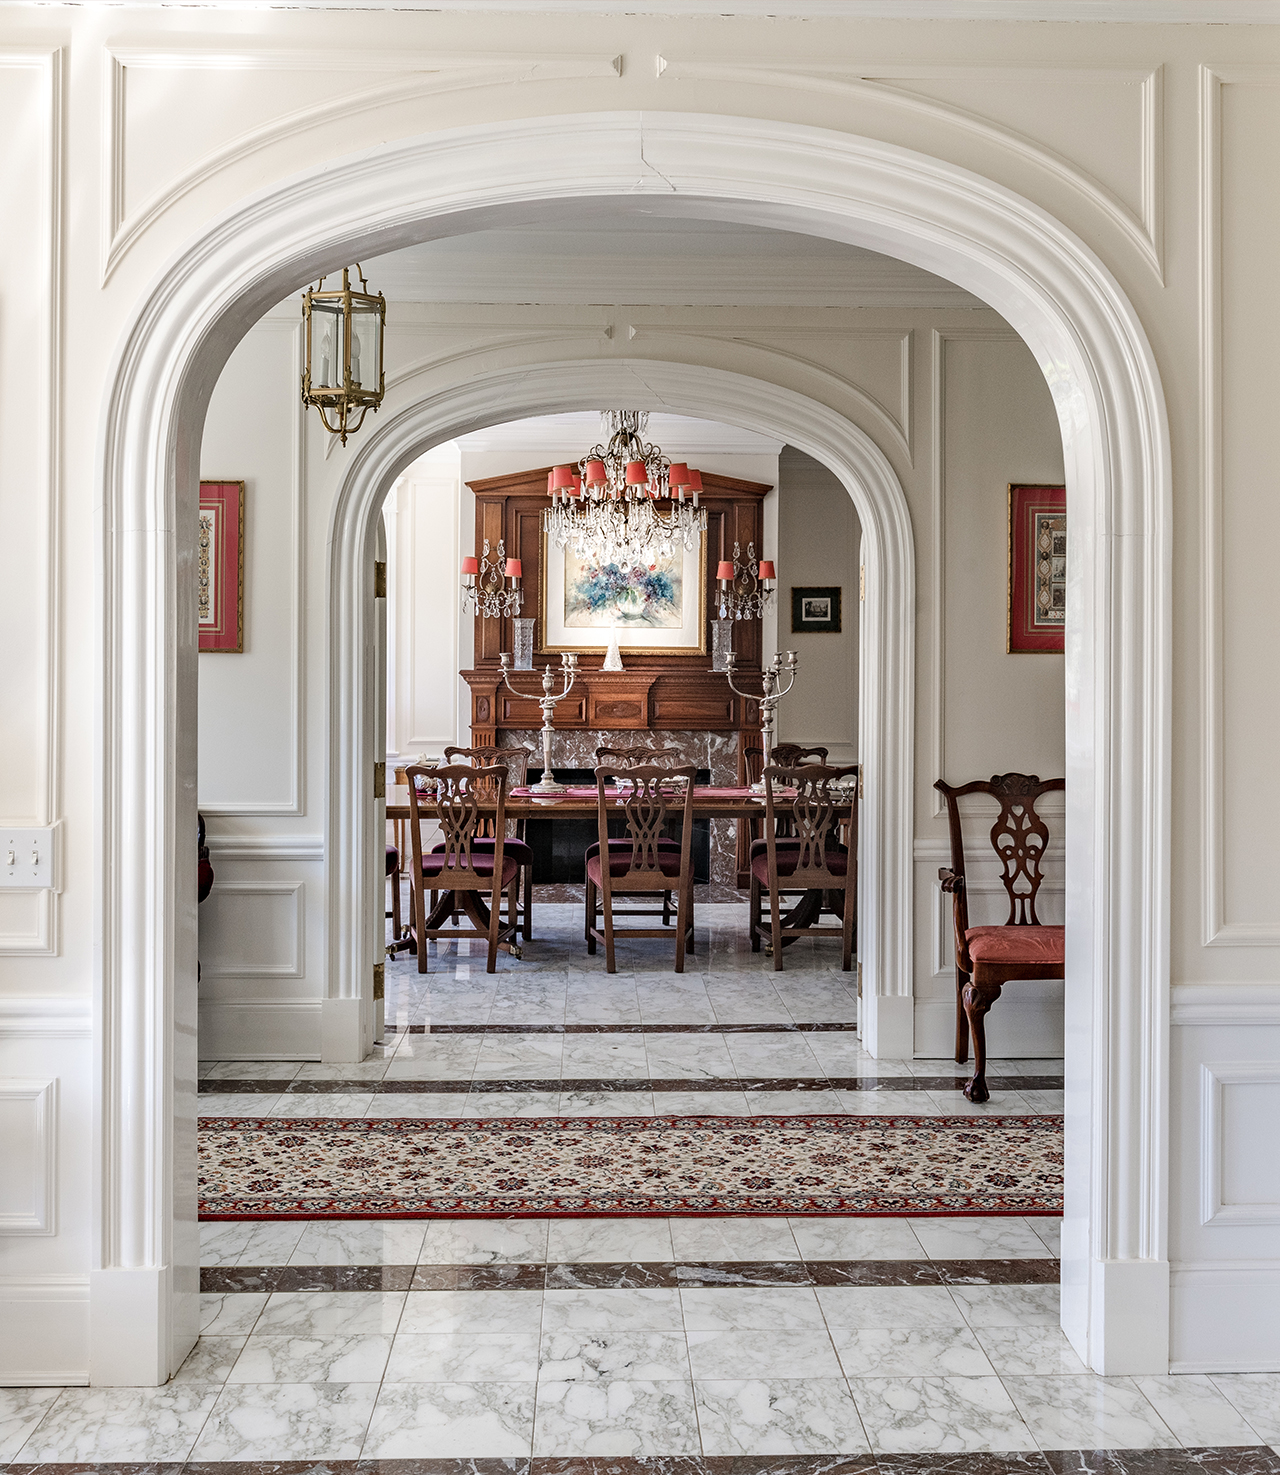 East Hampton Village "White House" arched doorways and formal dining room.